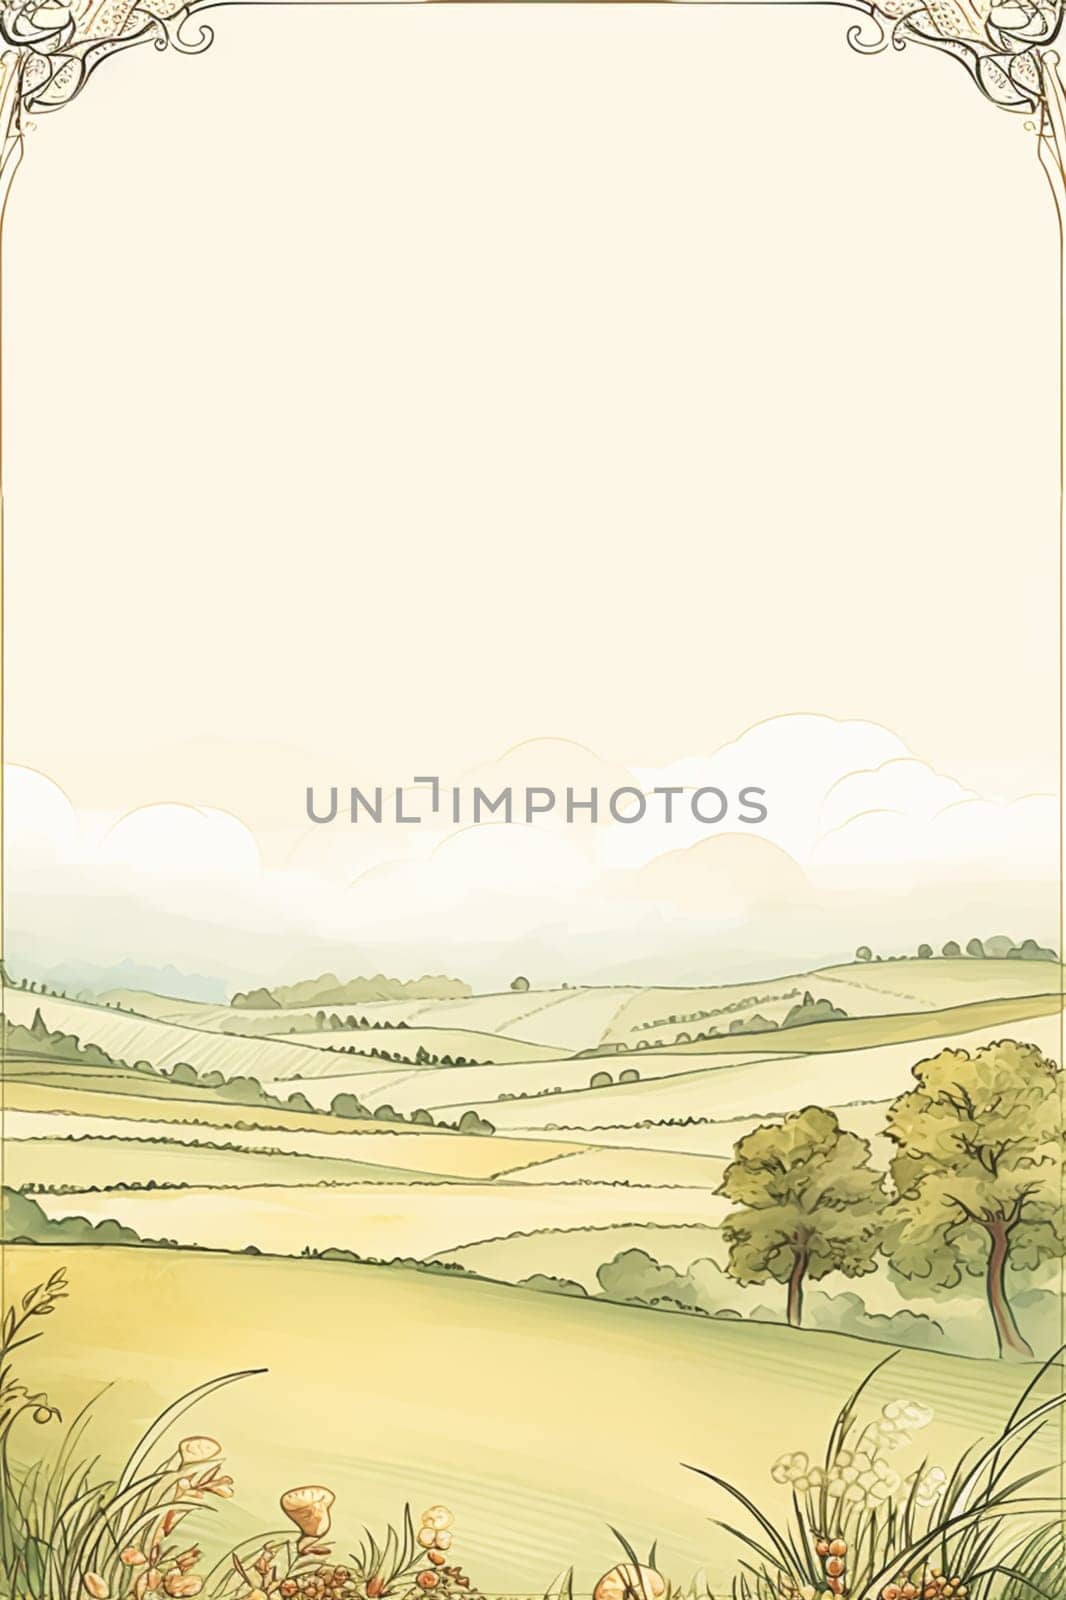 Book cover, digital paper illustration and greeting card design, English countryside style blank vintage art background for printable stationery, book page and ebook idea